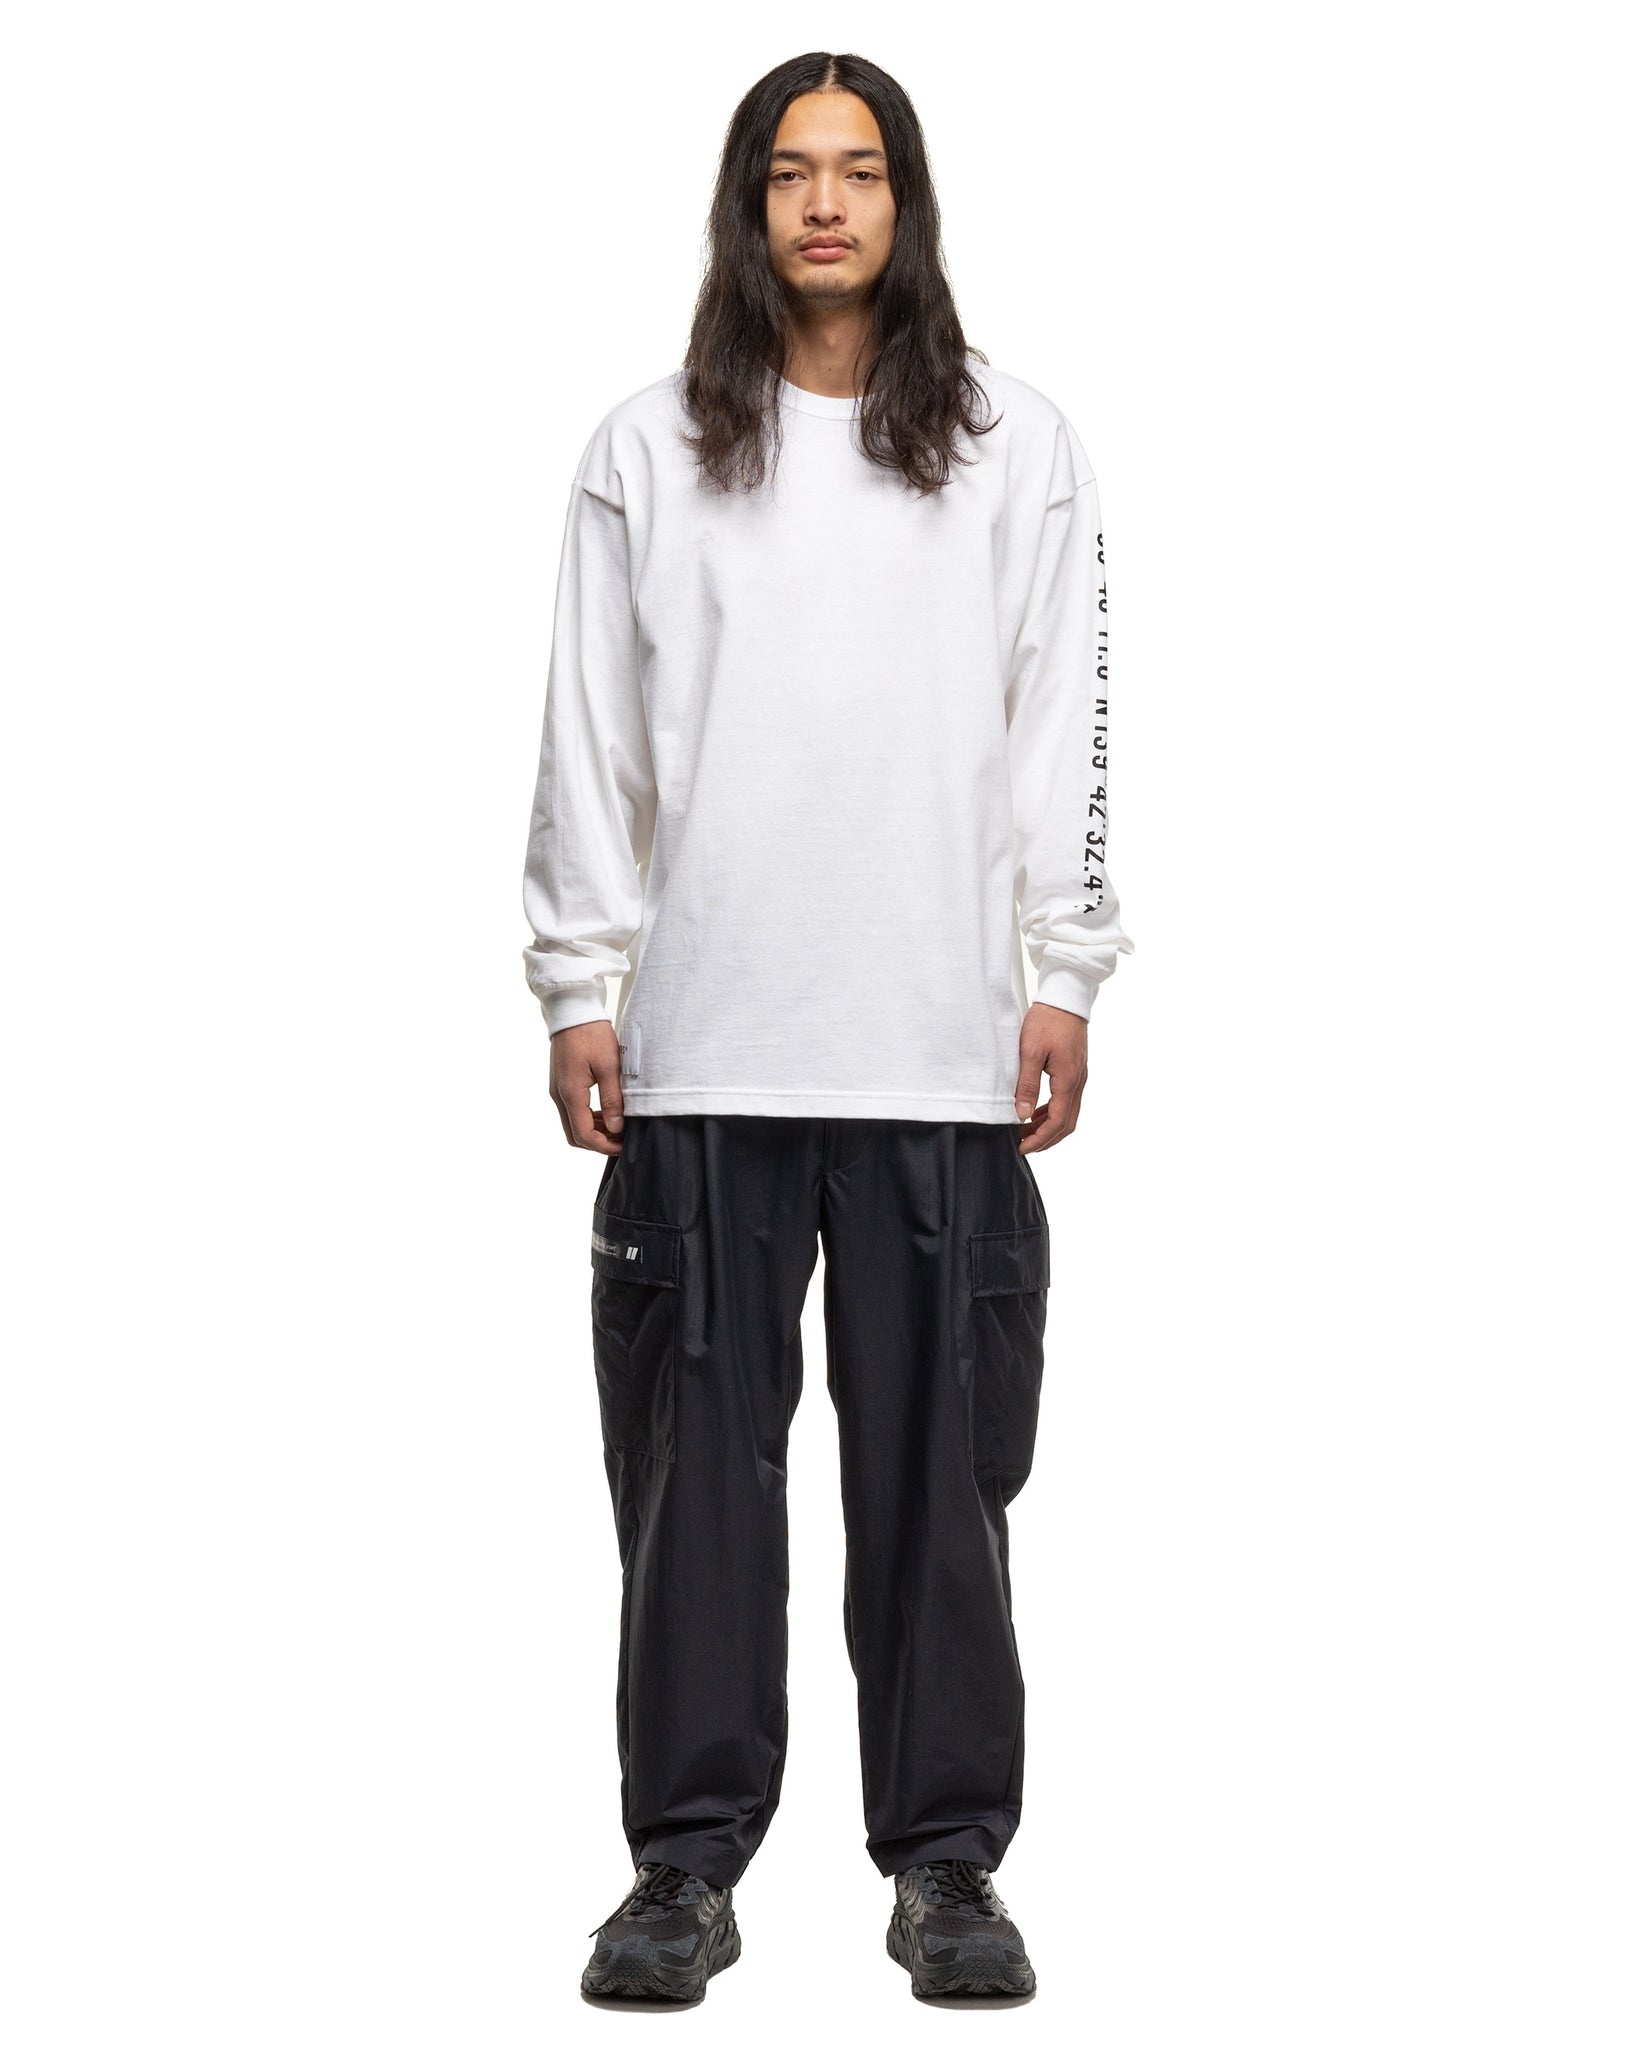 OBJ 03 / LS / Cotton. Fortless Pullover WHITE - 2